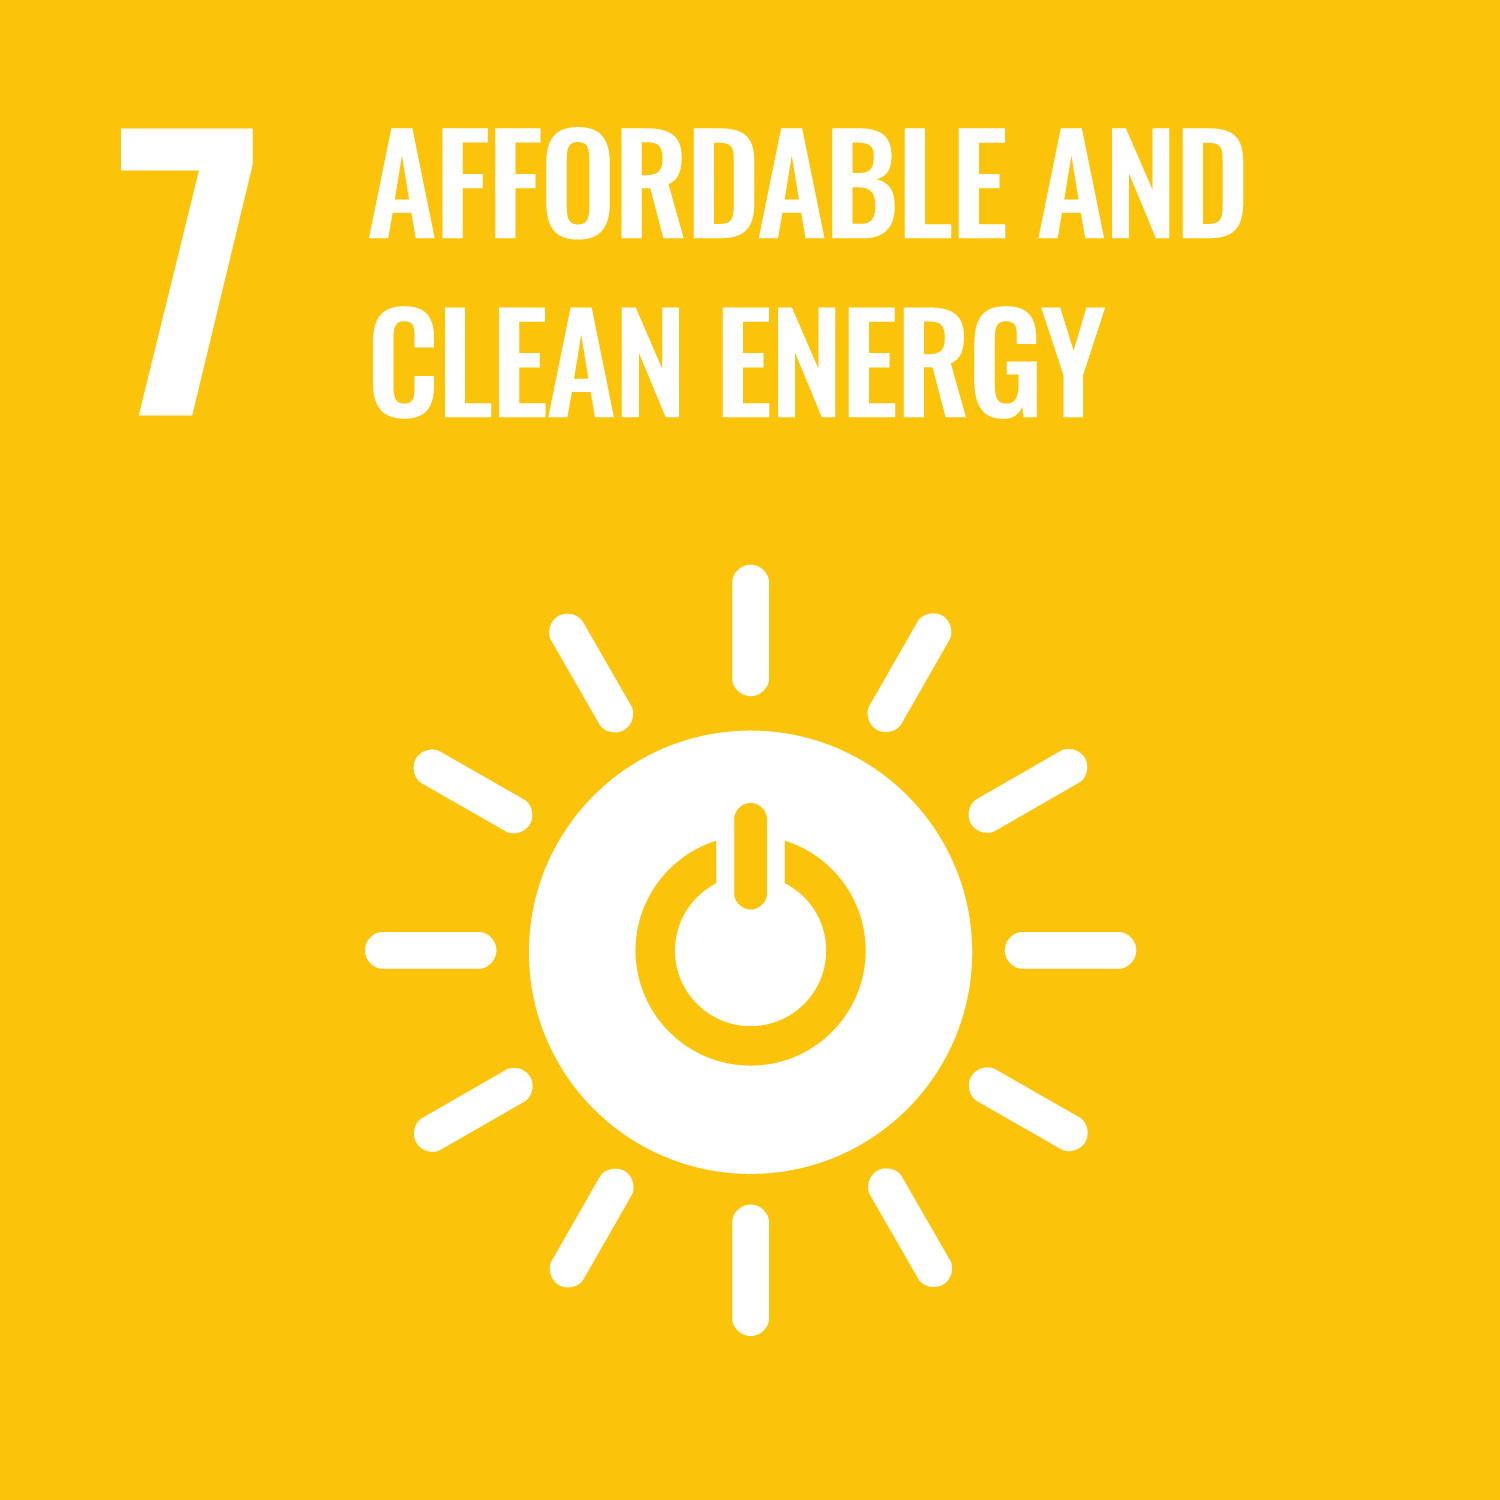 SDG Goal 7: Affordable and Clean Energy